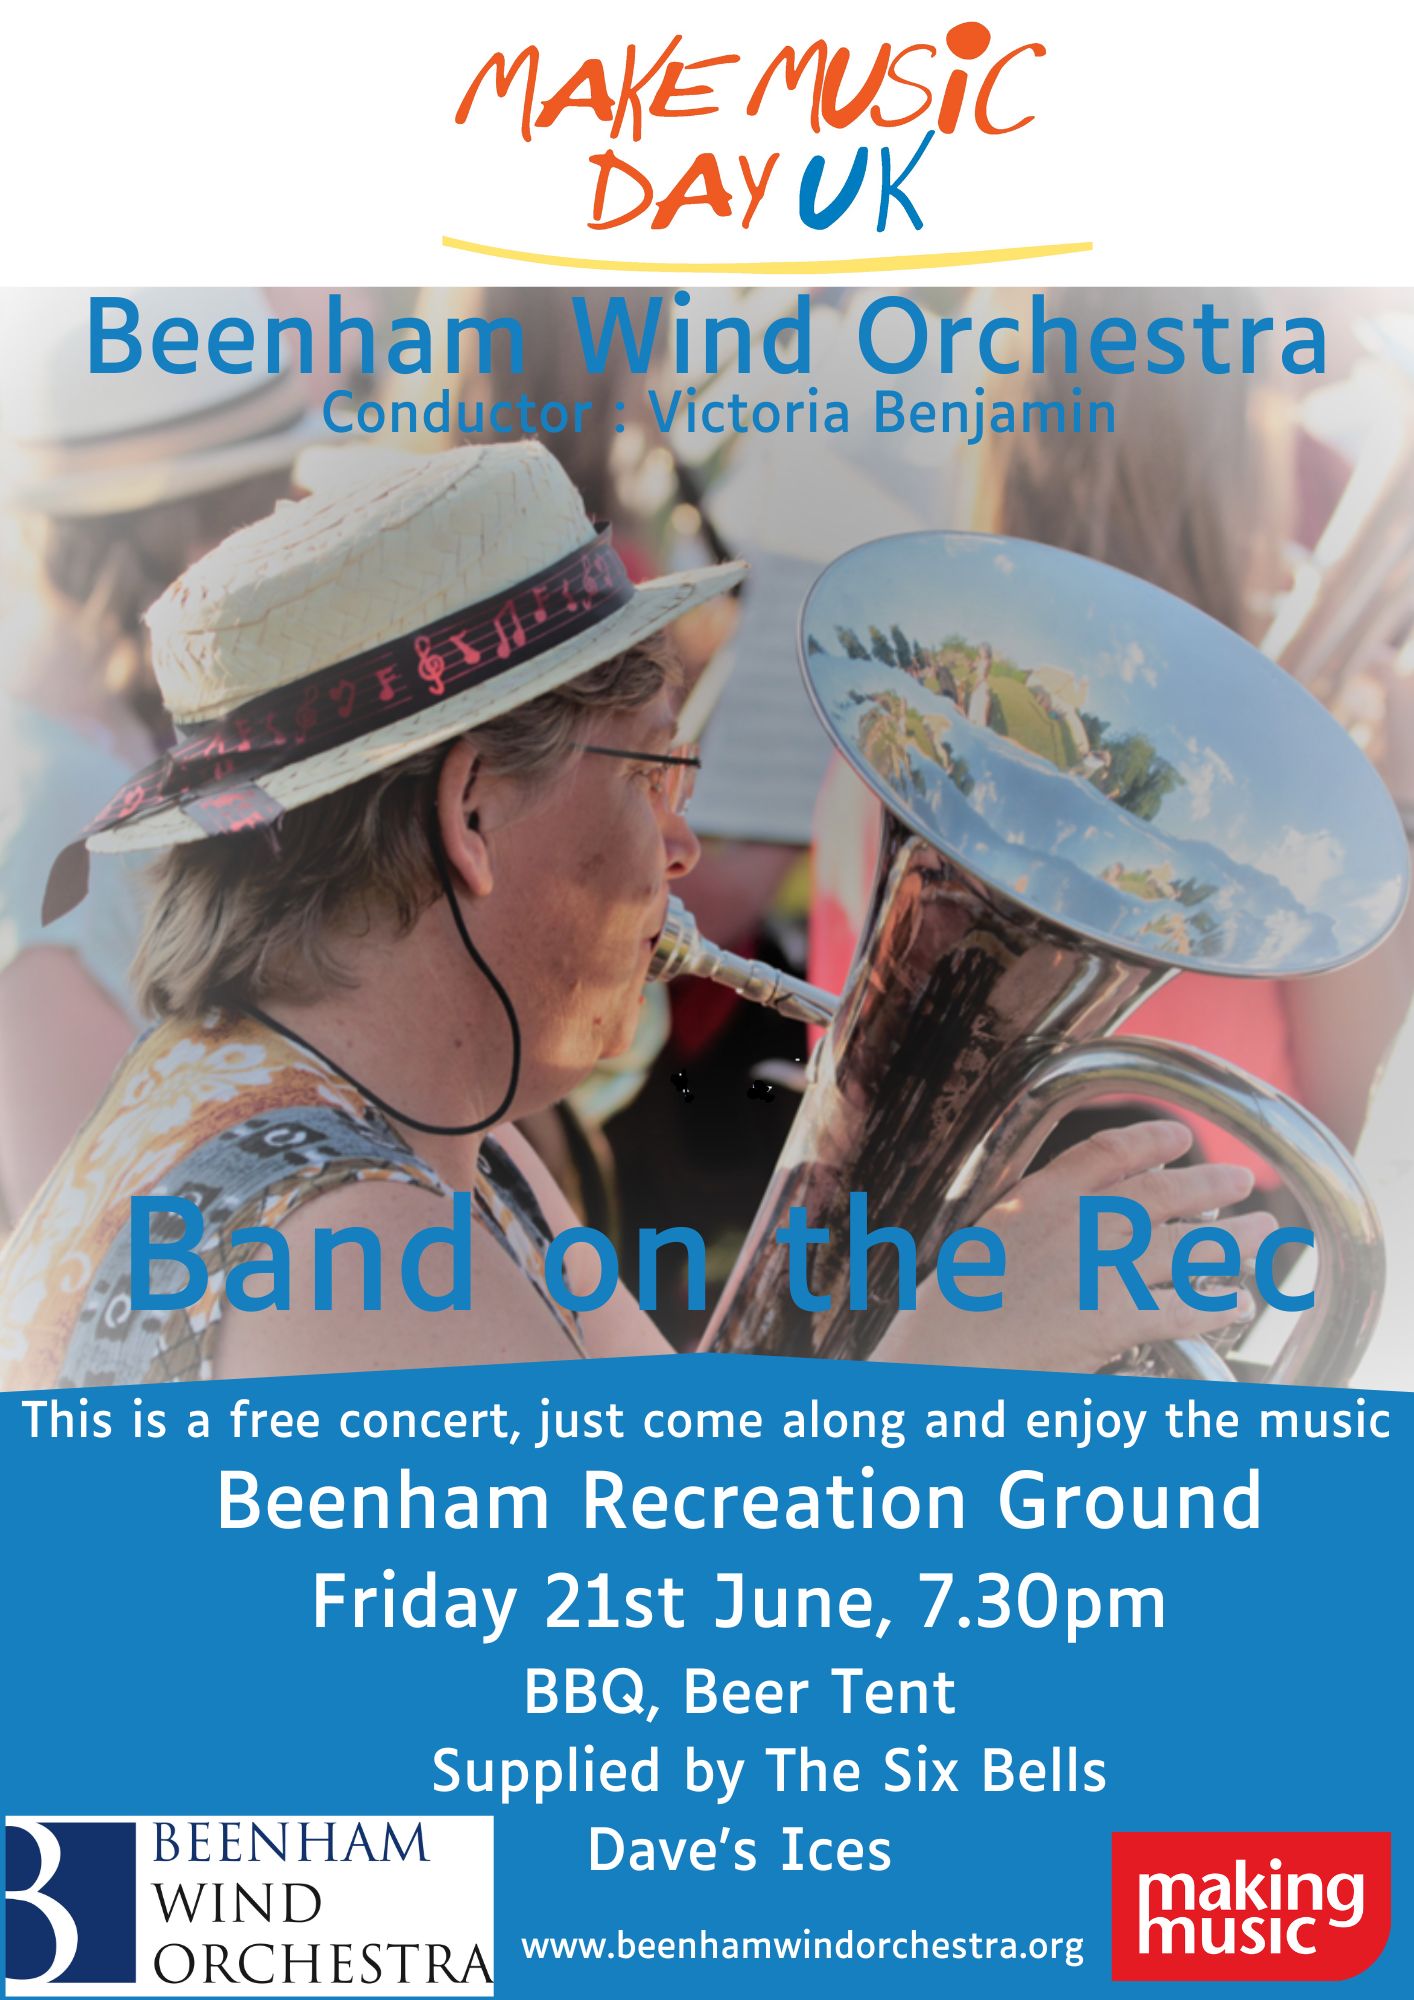 Band on the rec. Friday 21 June at 7.30pm